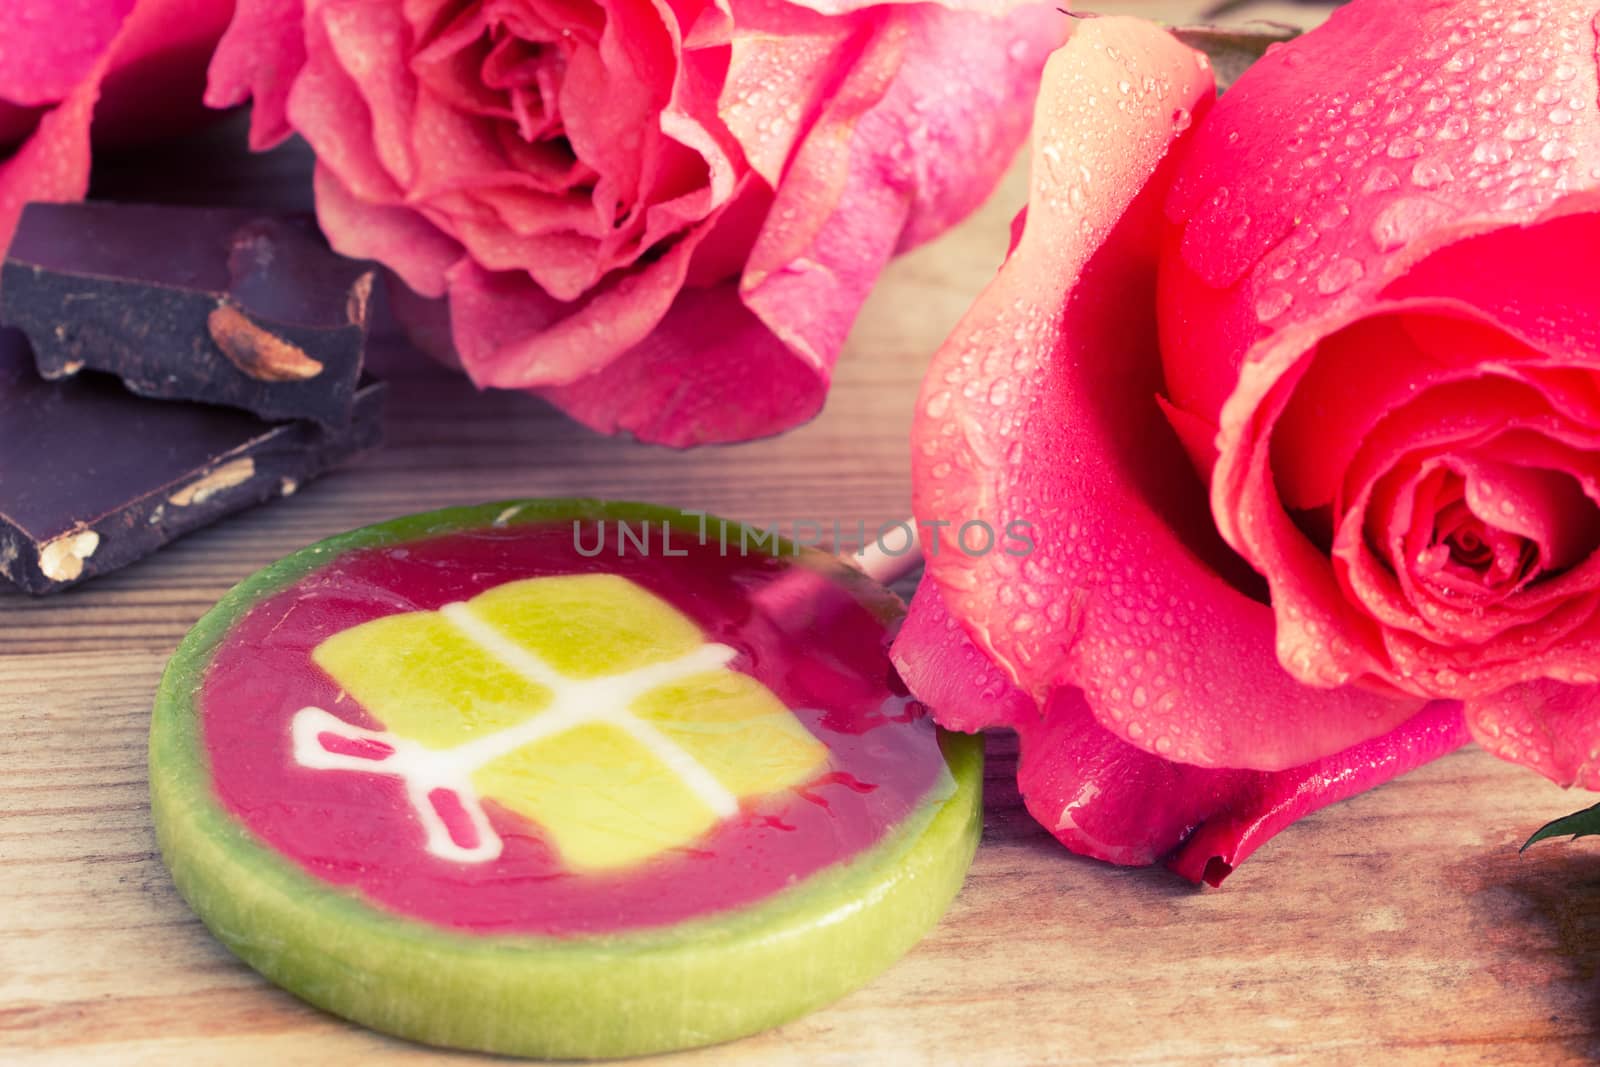 pink roses and lollipop on wooden table. holiday concept